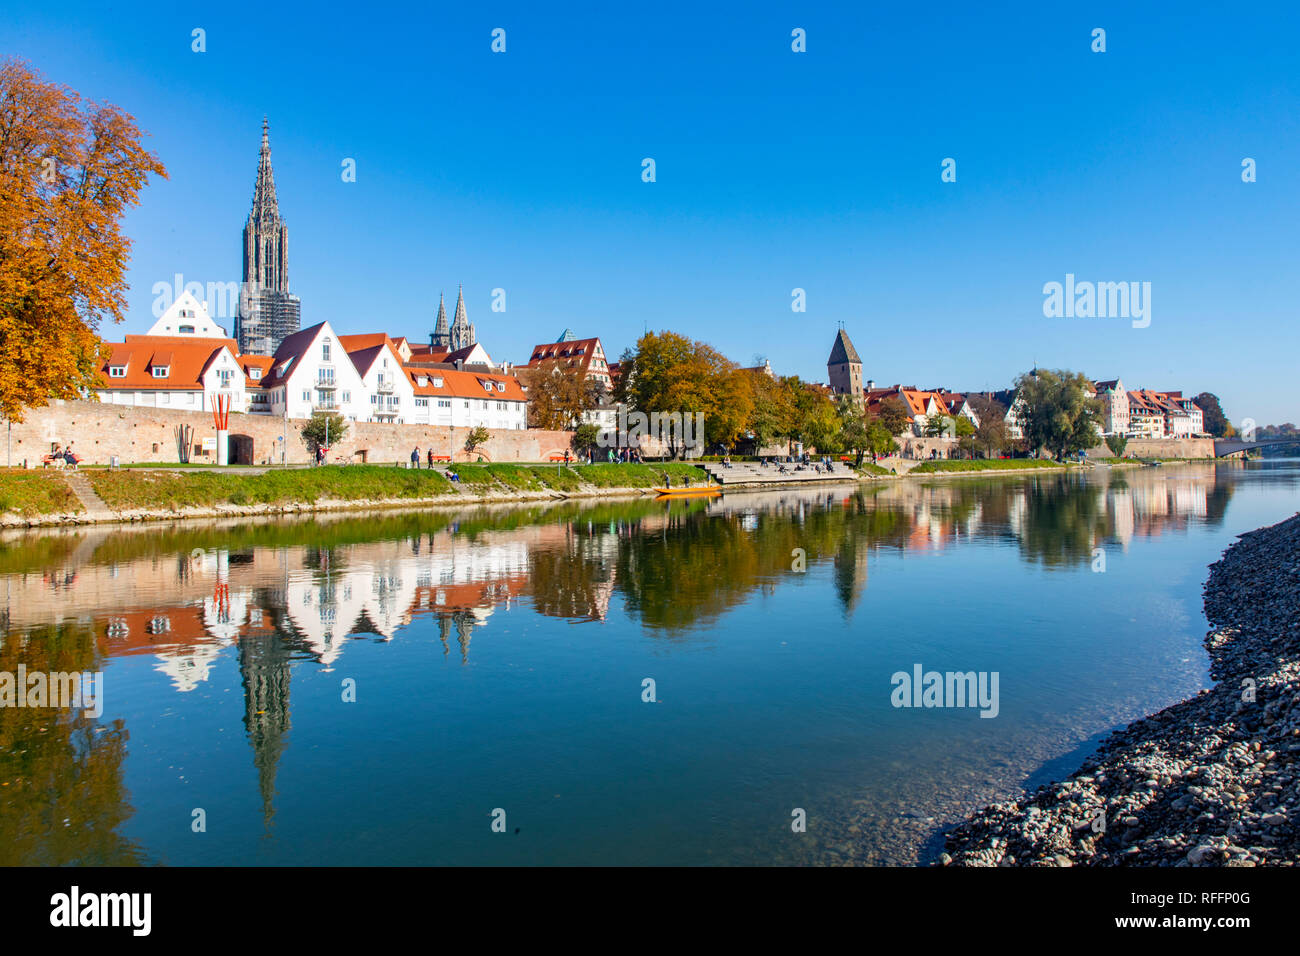 Ulm, skyline of the Old Town on the Danube river, Germany,  Ulmer MŸnster church, Stock Photo